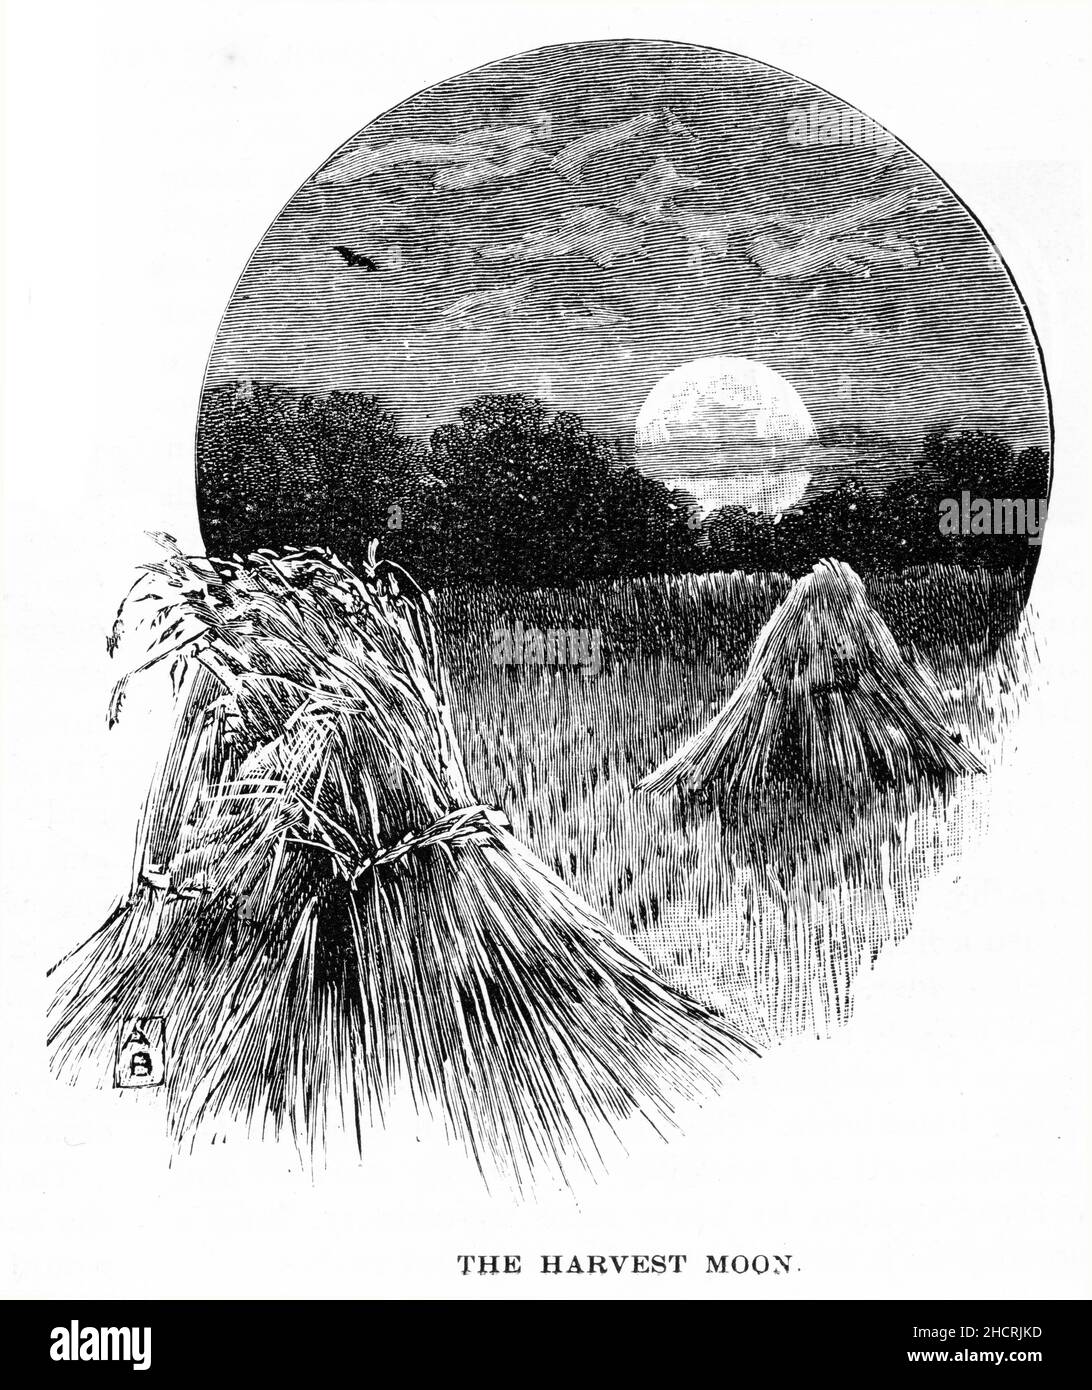 Engraving of a harevst moon rising over sheaves of wheat, published 1892 Stock Photo